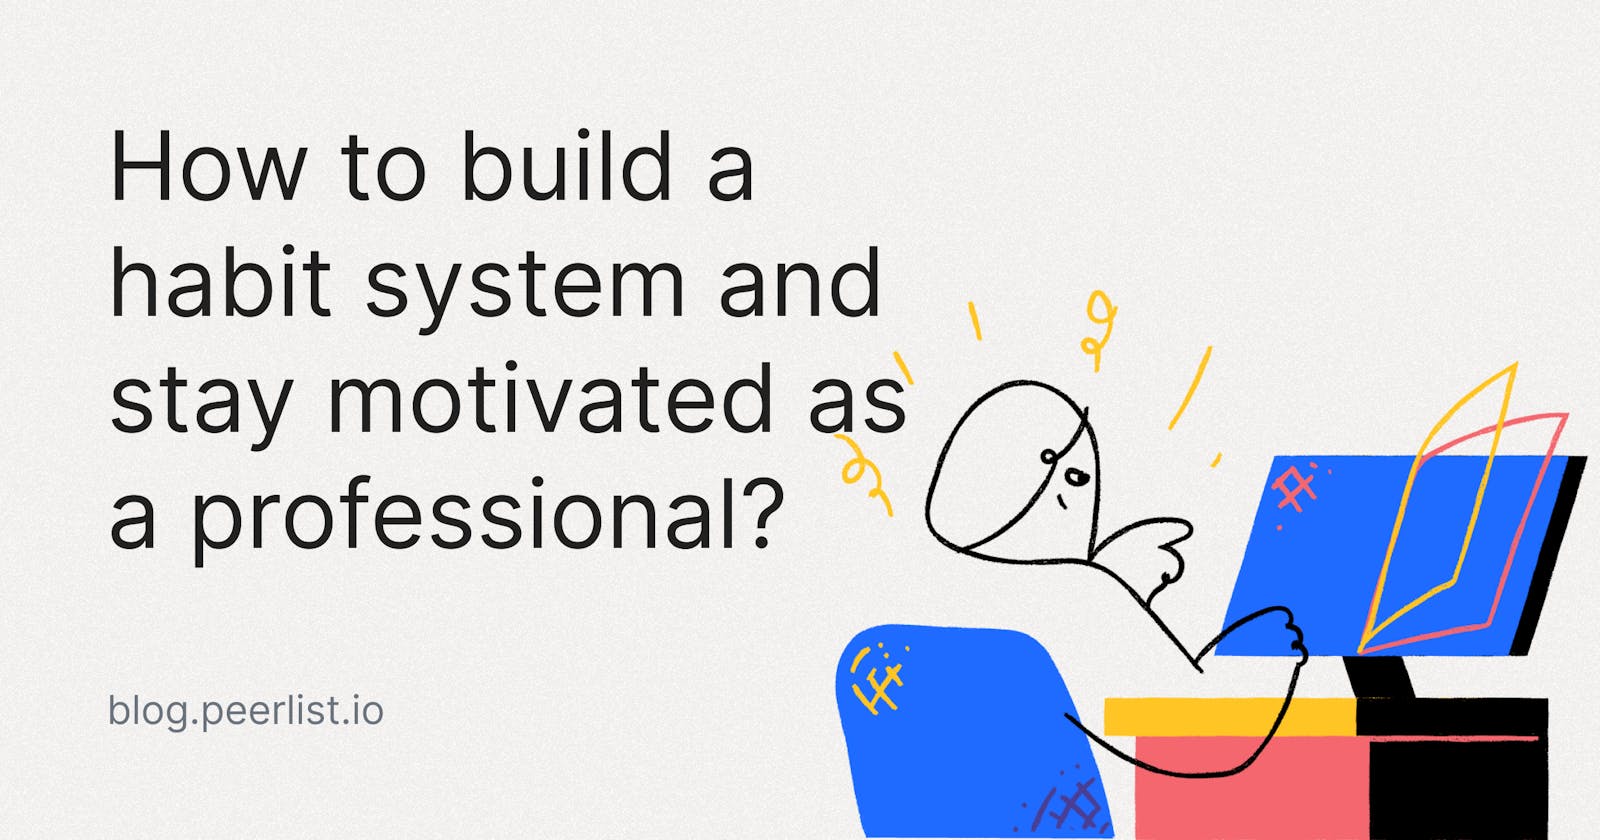 How to build a habit system and stay motivated as a professional?